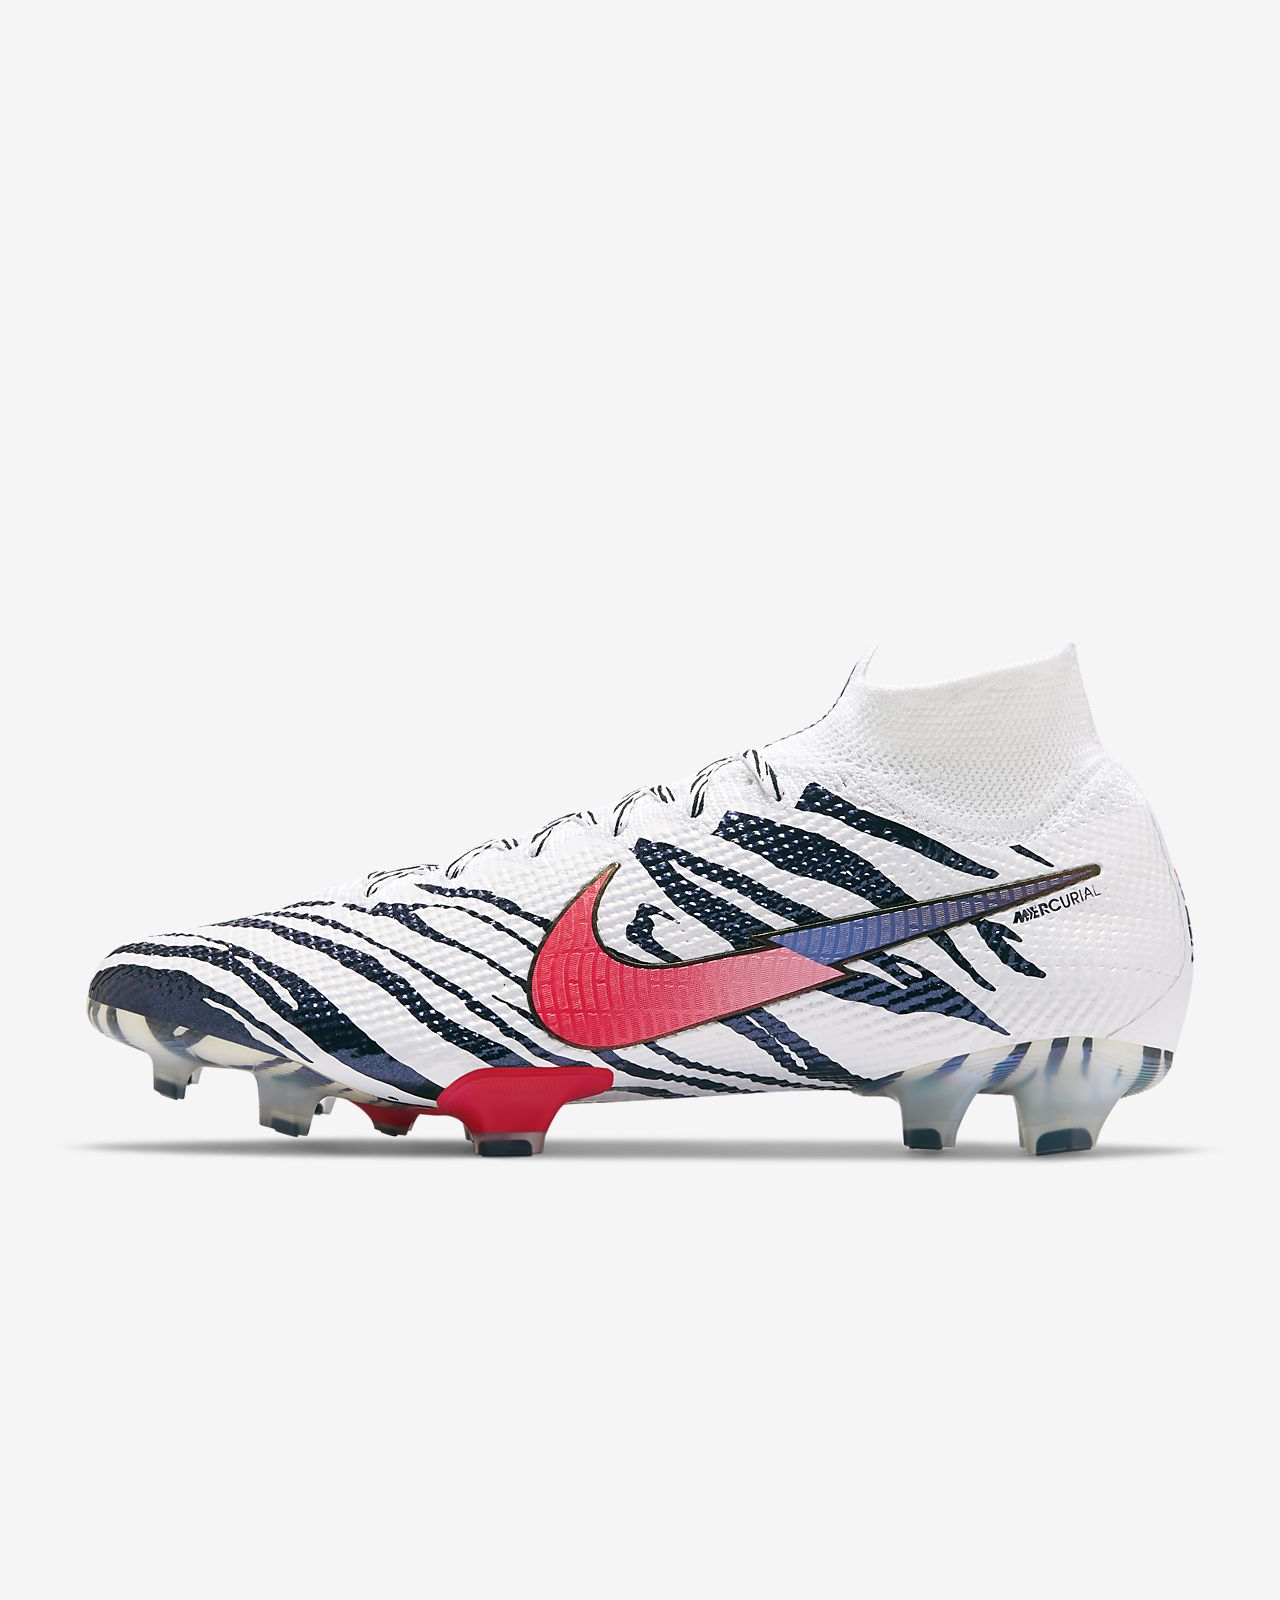 Nike Superfly 7 Pro Fg Mens Firm Ground Soccer Cleat.